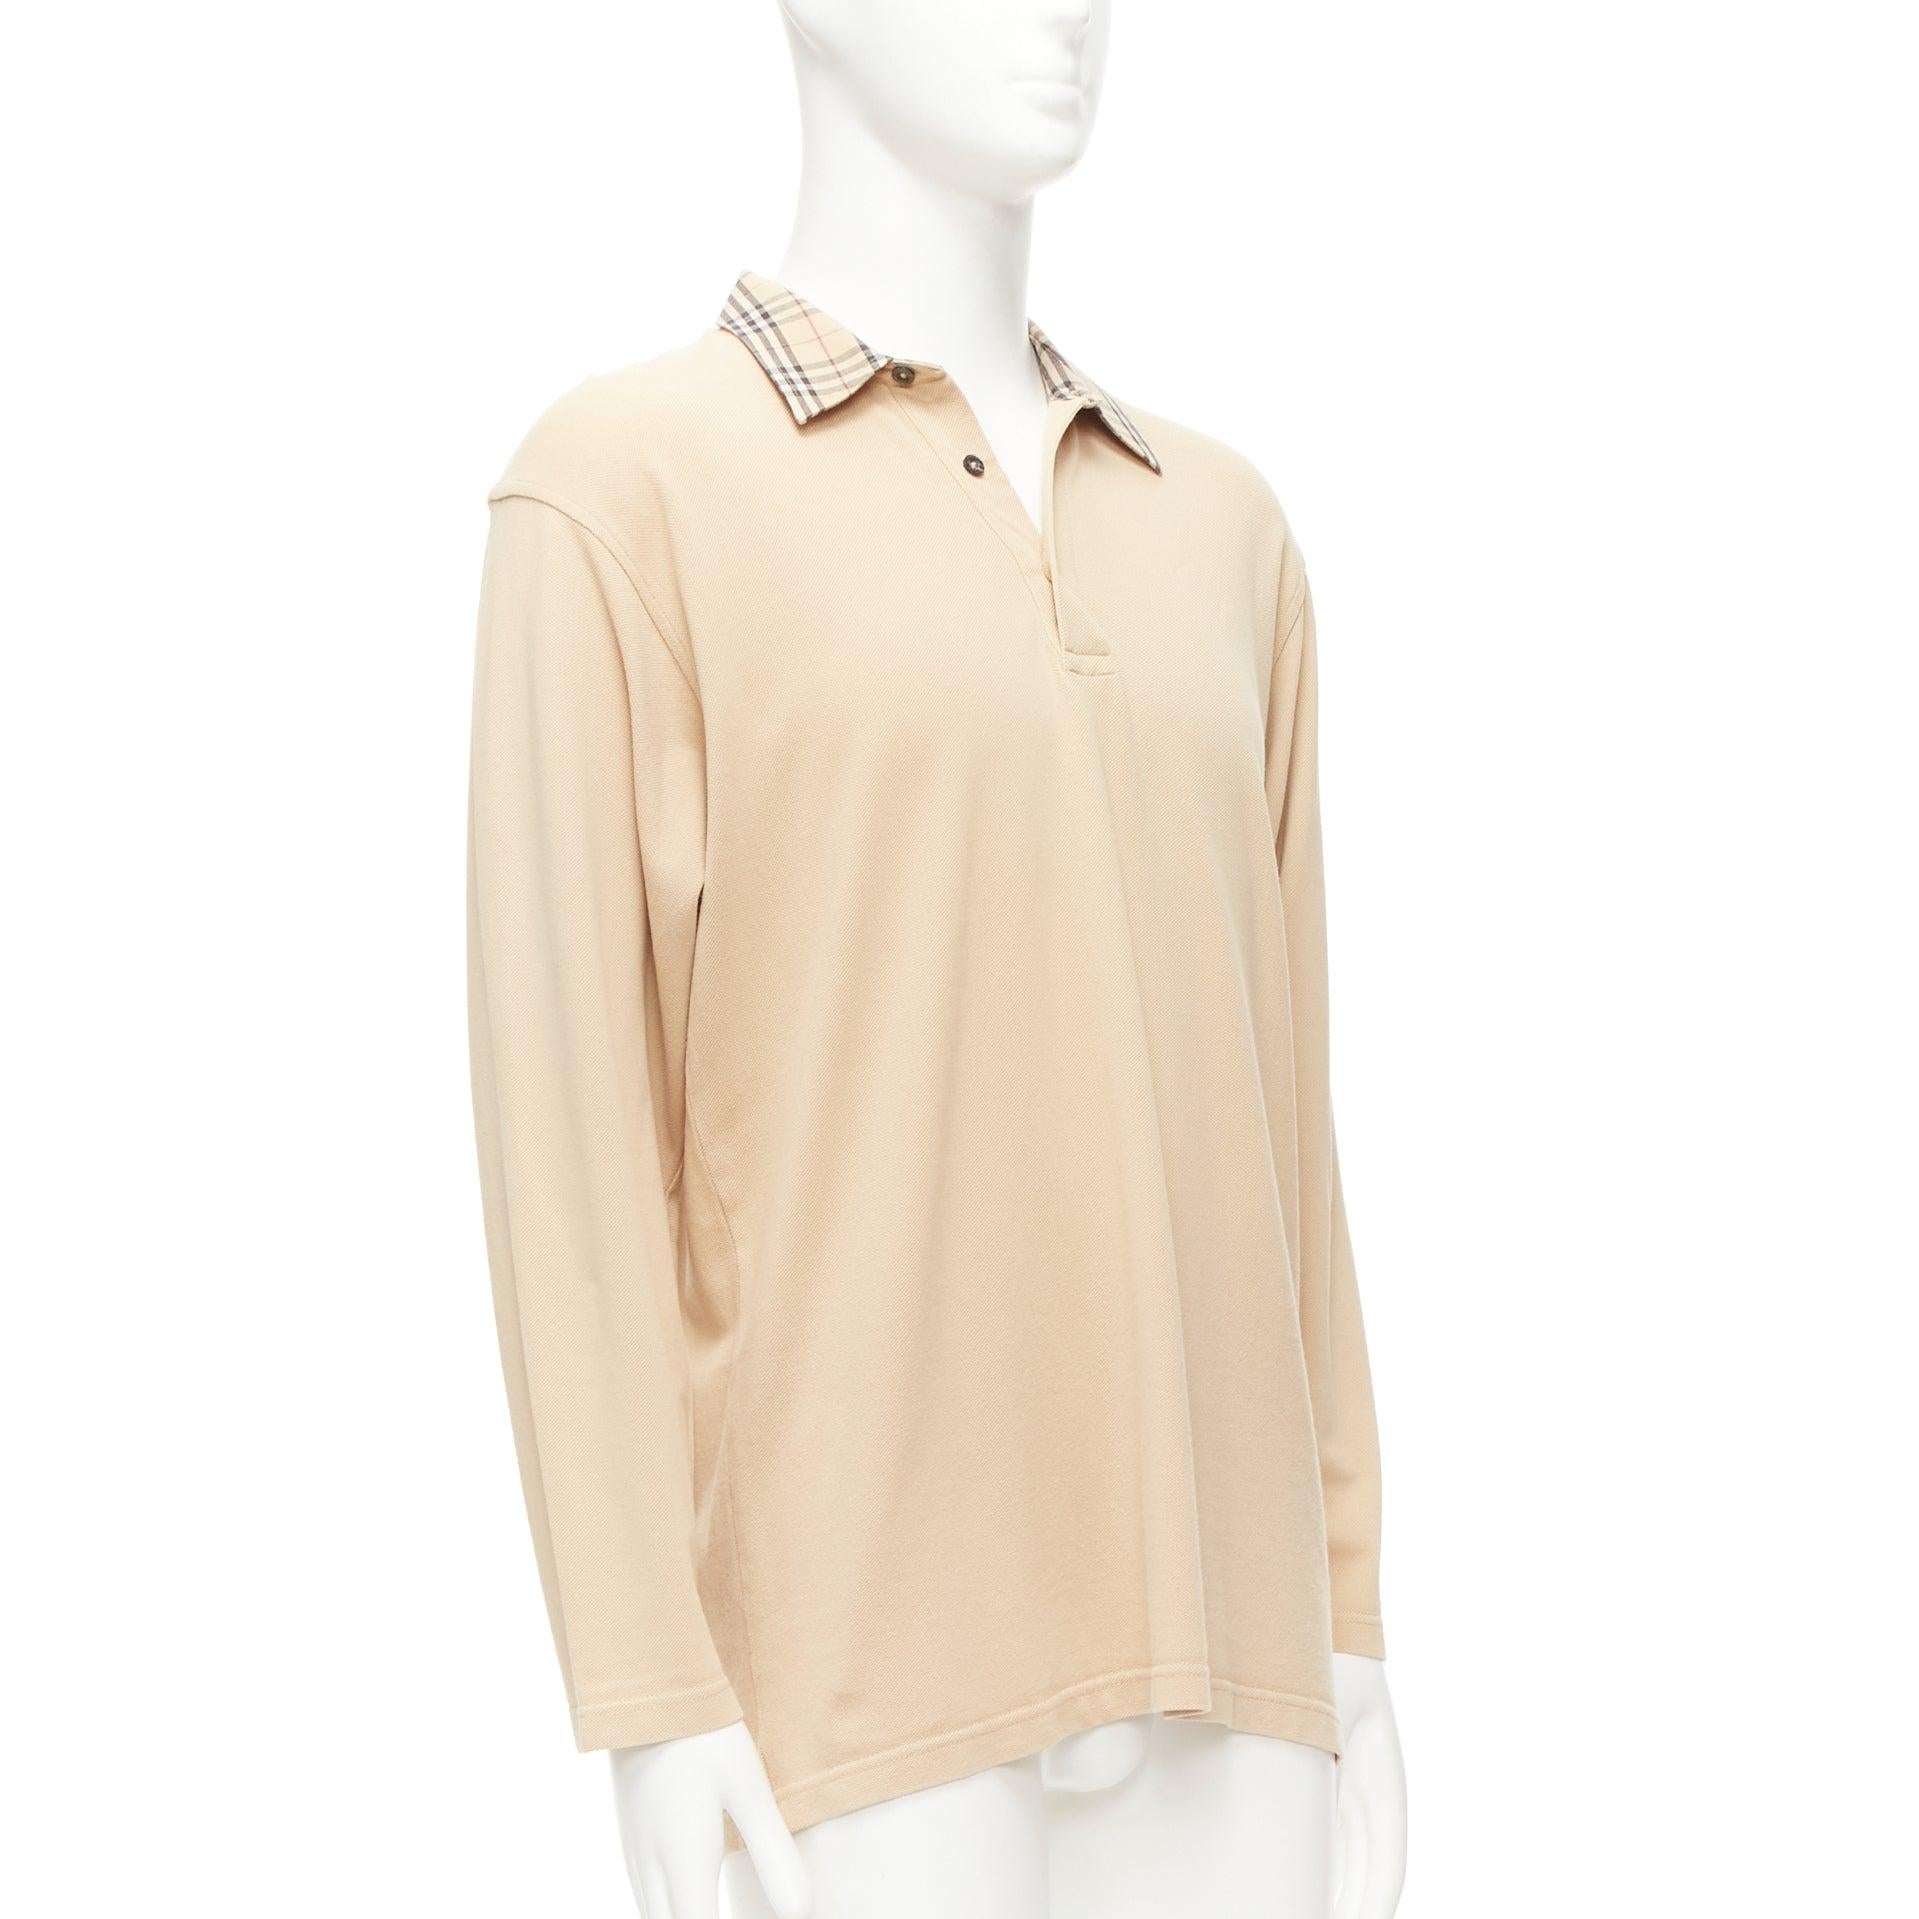 BURBERRY LONDON beige House Check collar relaxed long sleeve polo shirt L
Reference: CNLE/A00285
Brand: Burberry
Material: Cotton
Color: Beige
Pattern: Checkered
Closure: Button

CONDITION:
Condition: Excellent, this item was pre-owned and is in